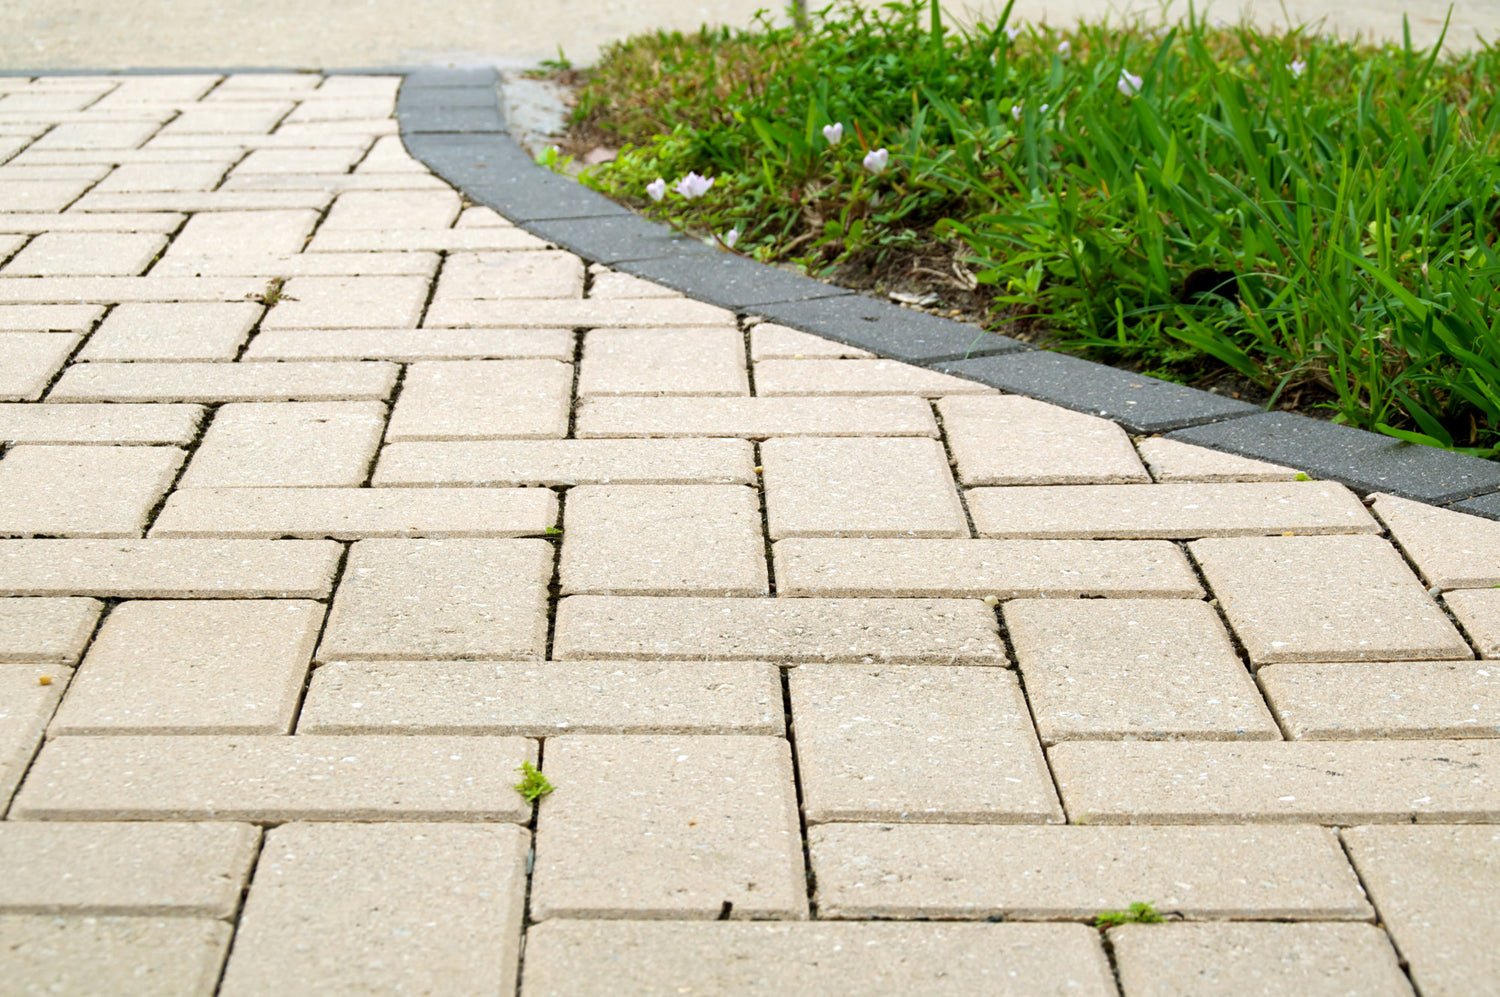 How To Find the Best Paver Sealer: A Guide